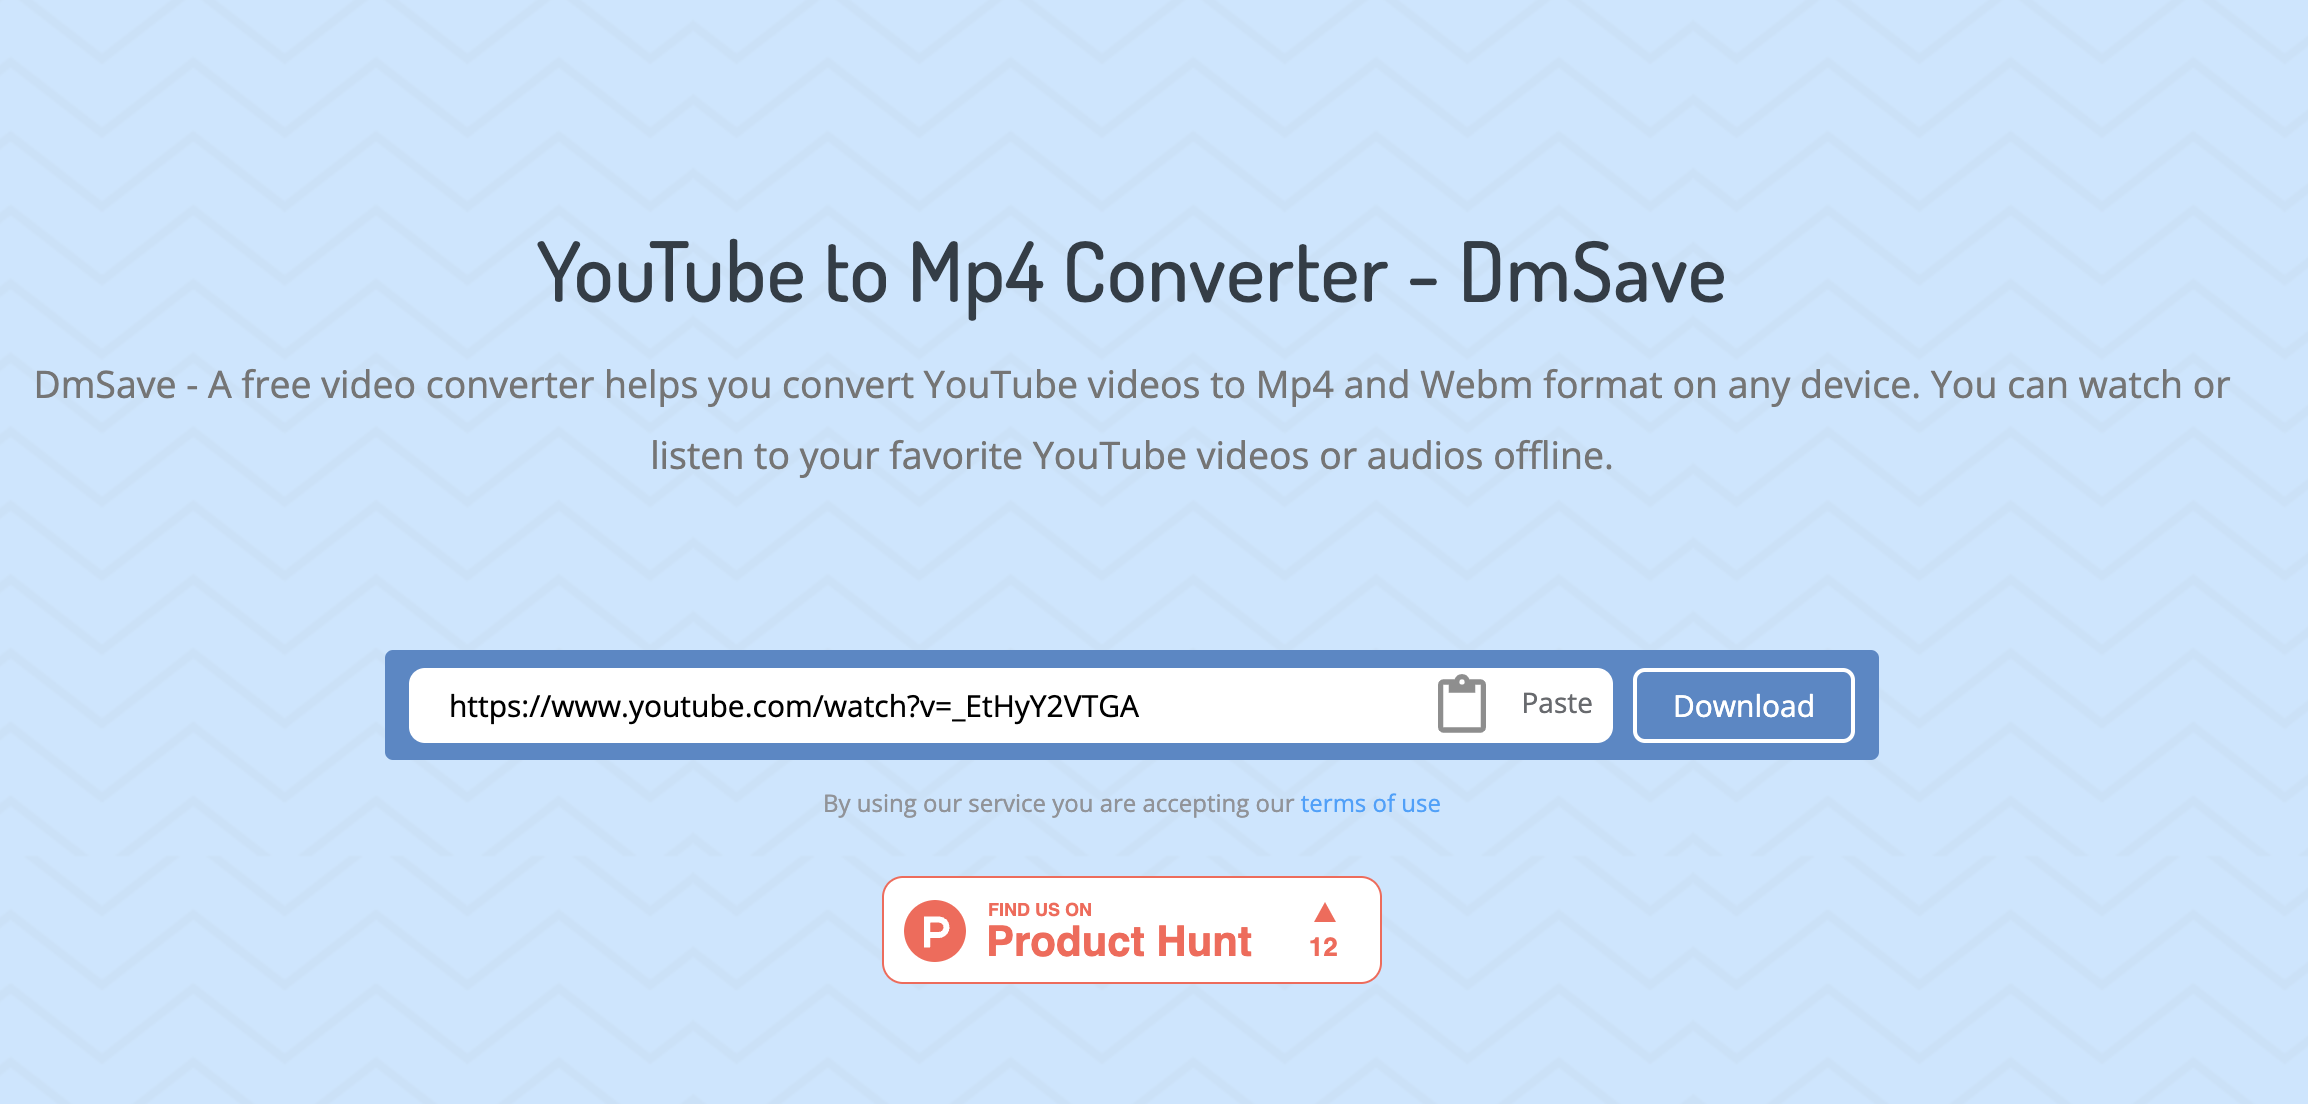 Paste the URL of the YouTube video in the input box of DmSave, and click the [Download] button;